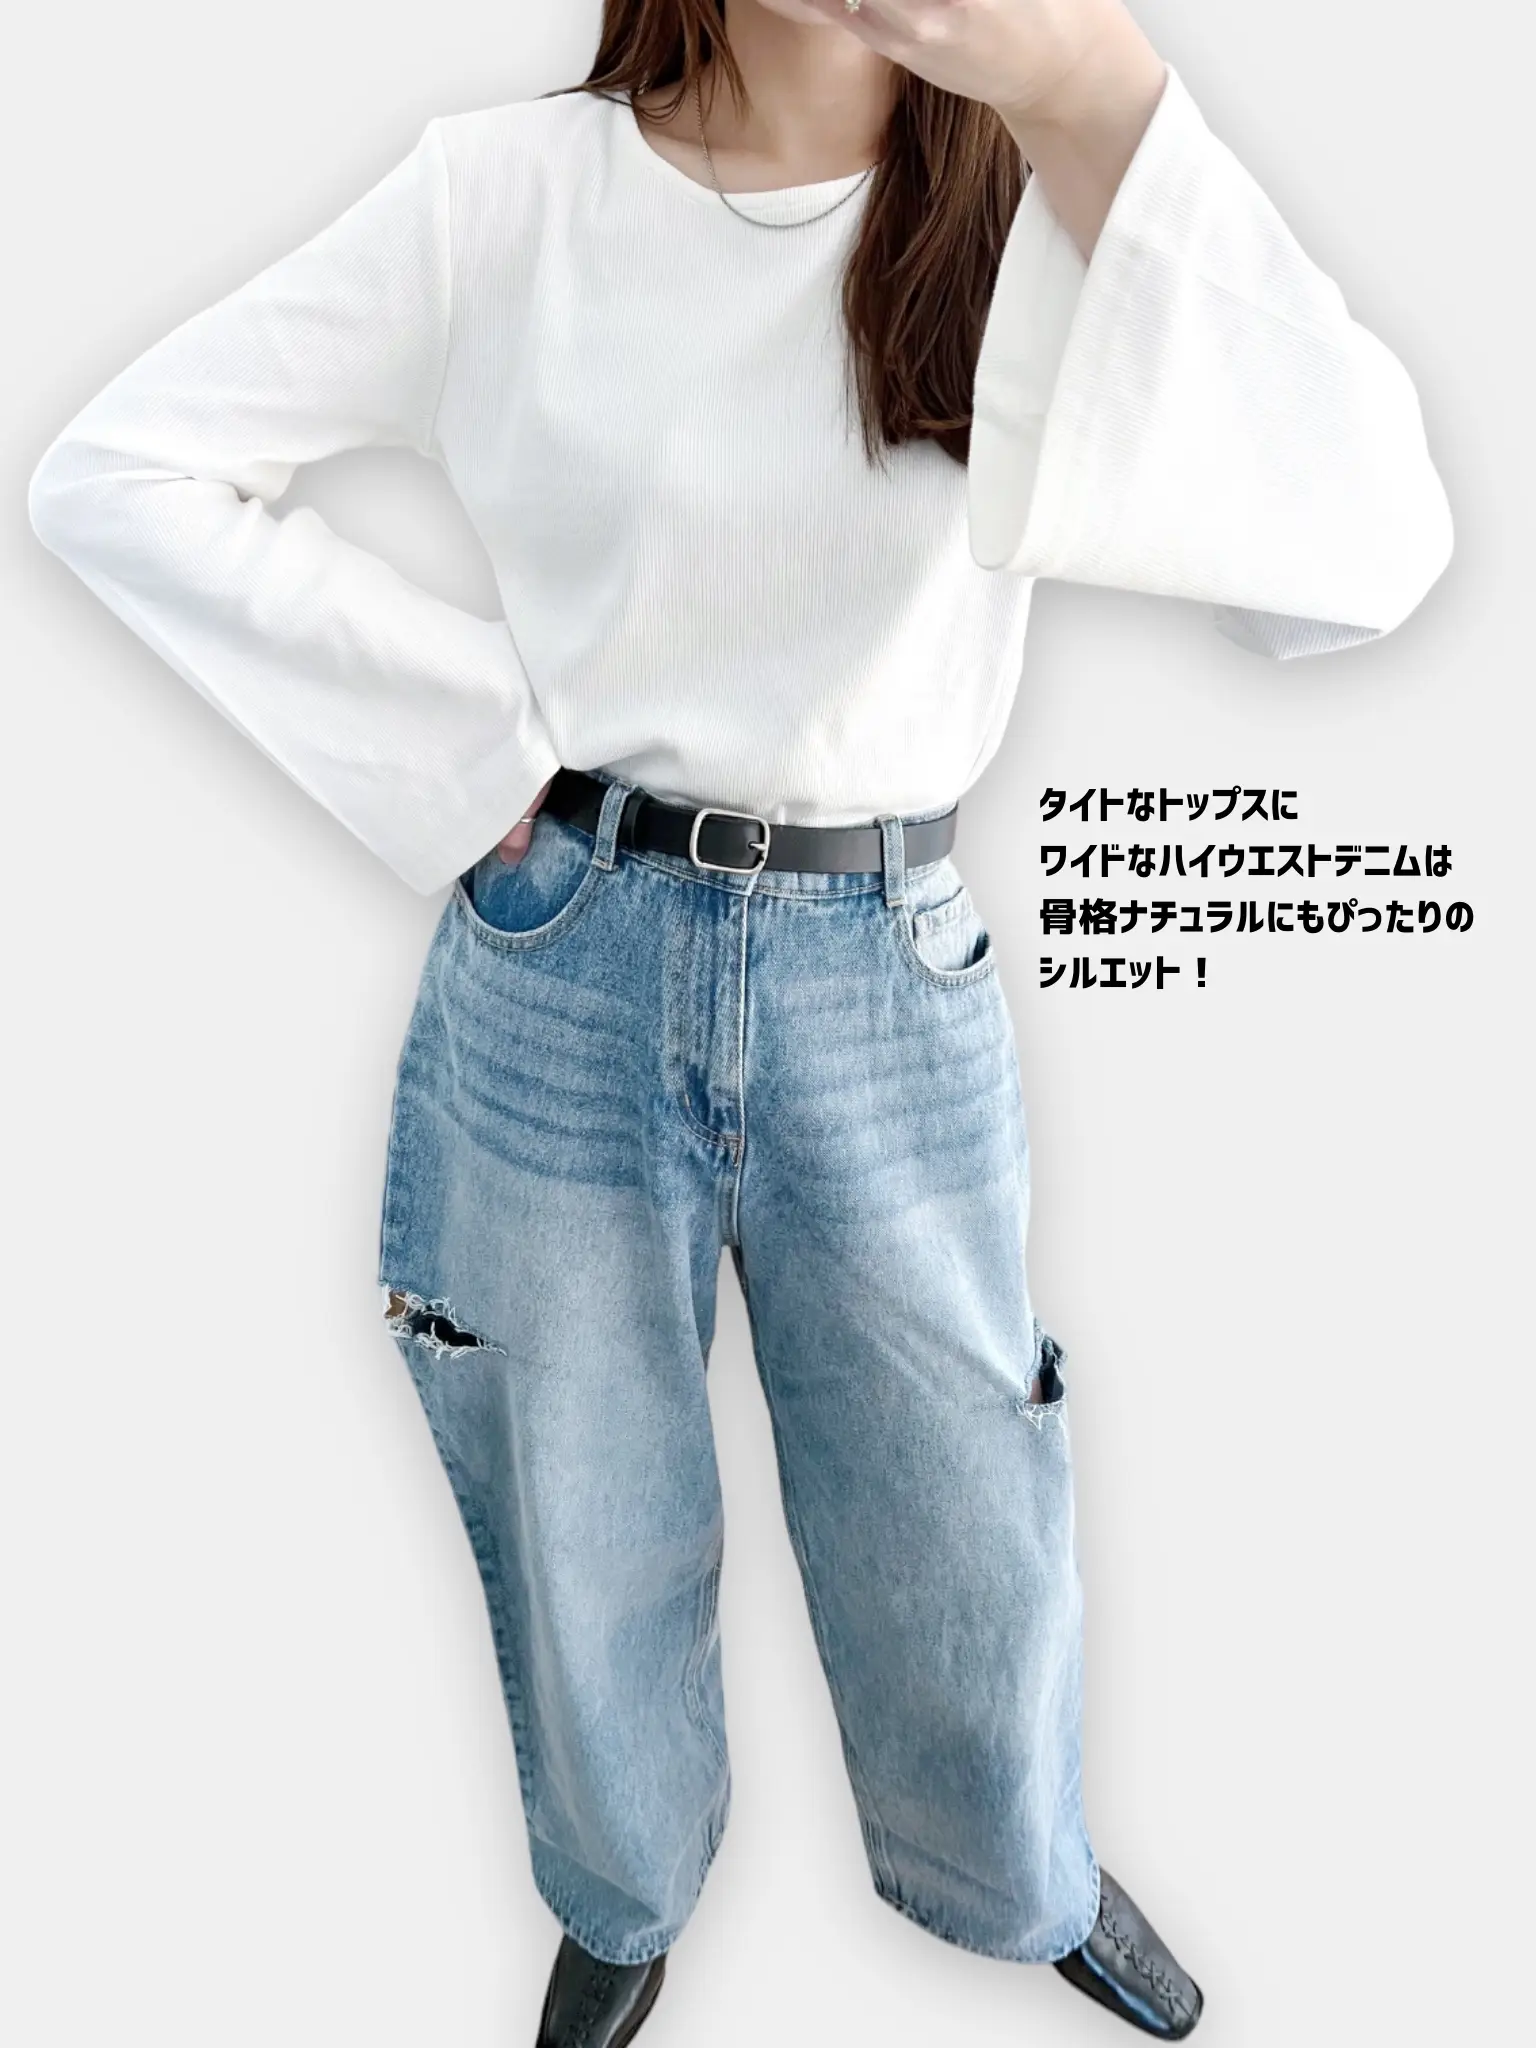 jeans☆sexy☆上下セット☆新品❣️キュート